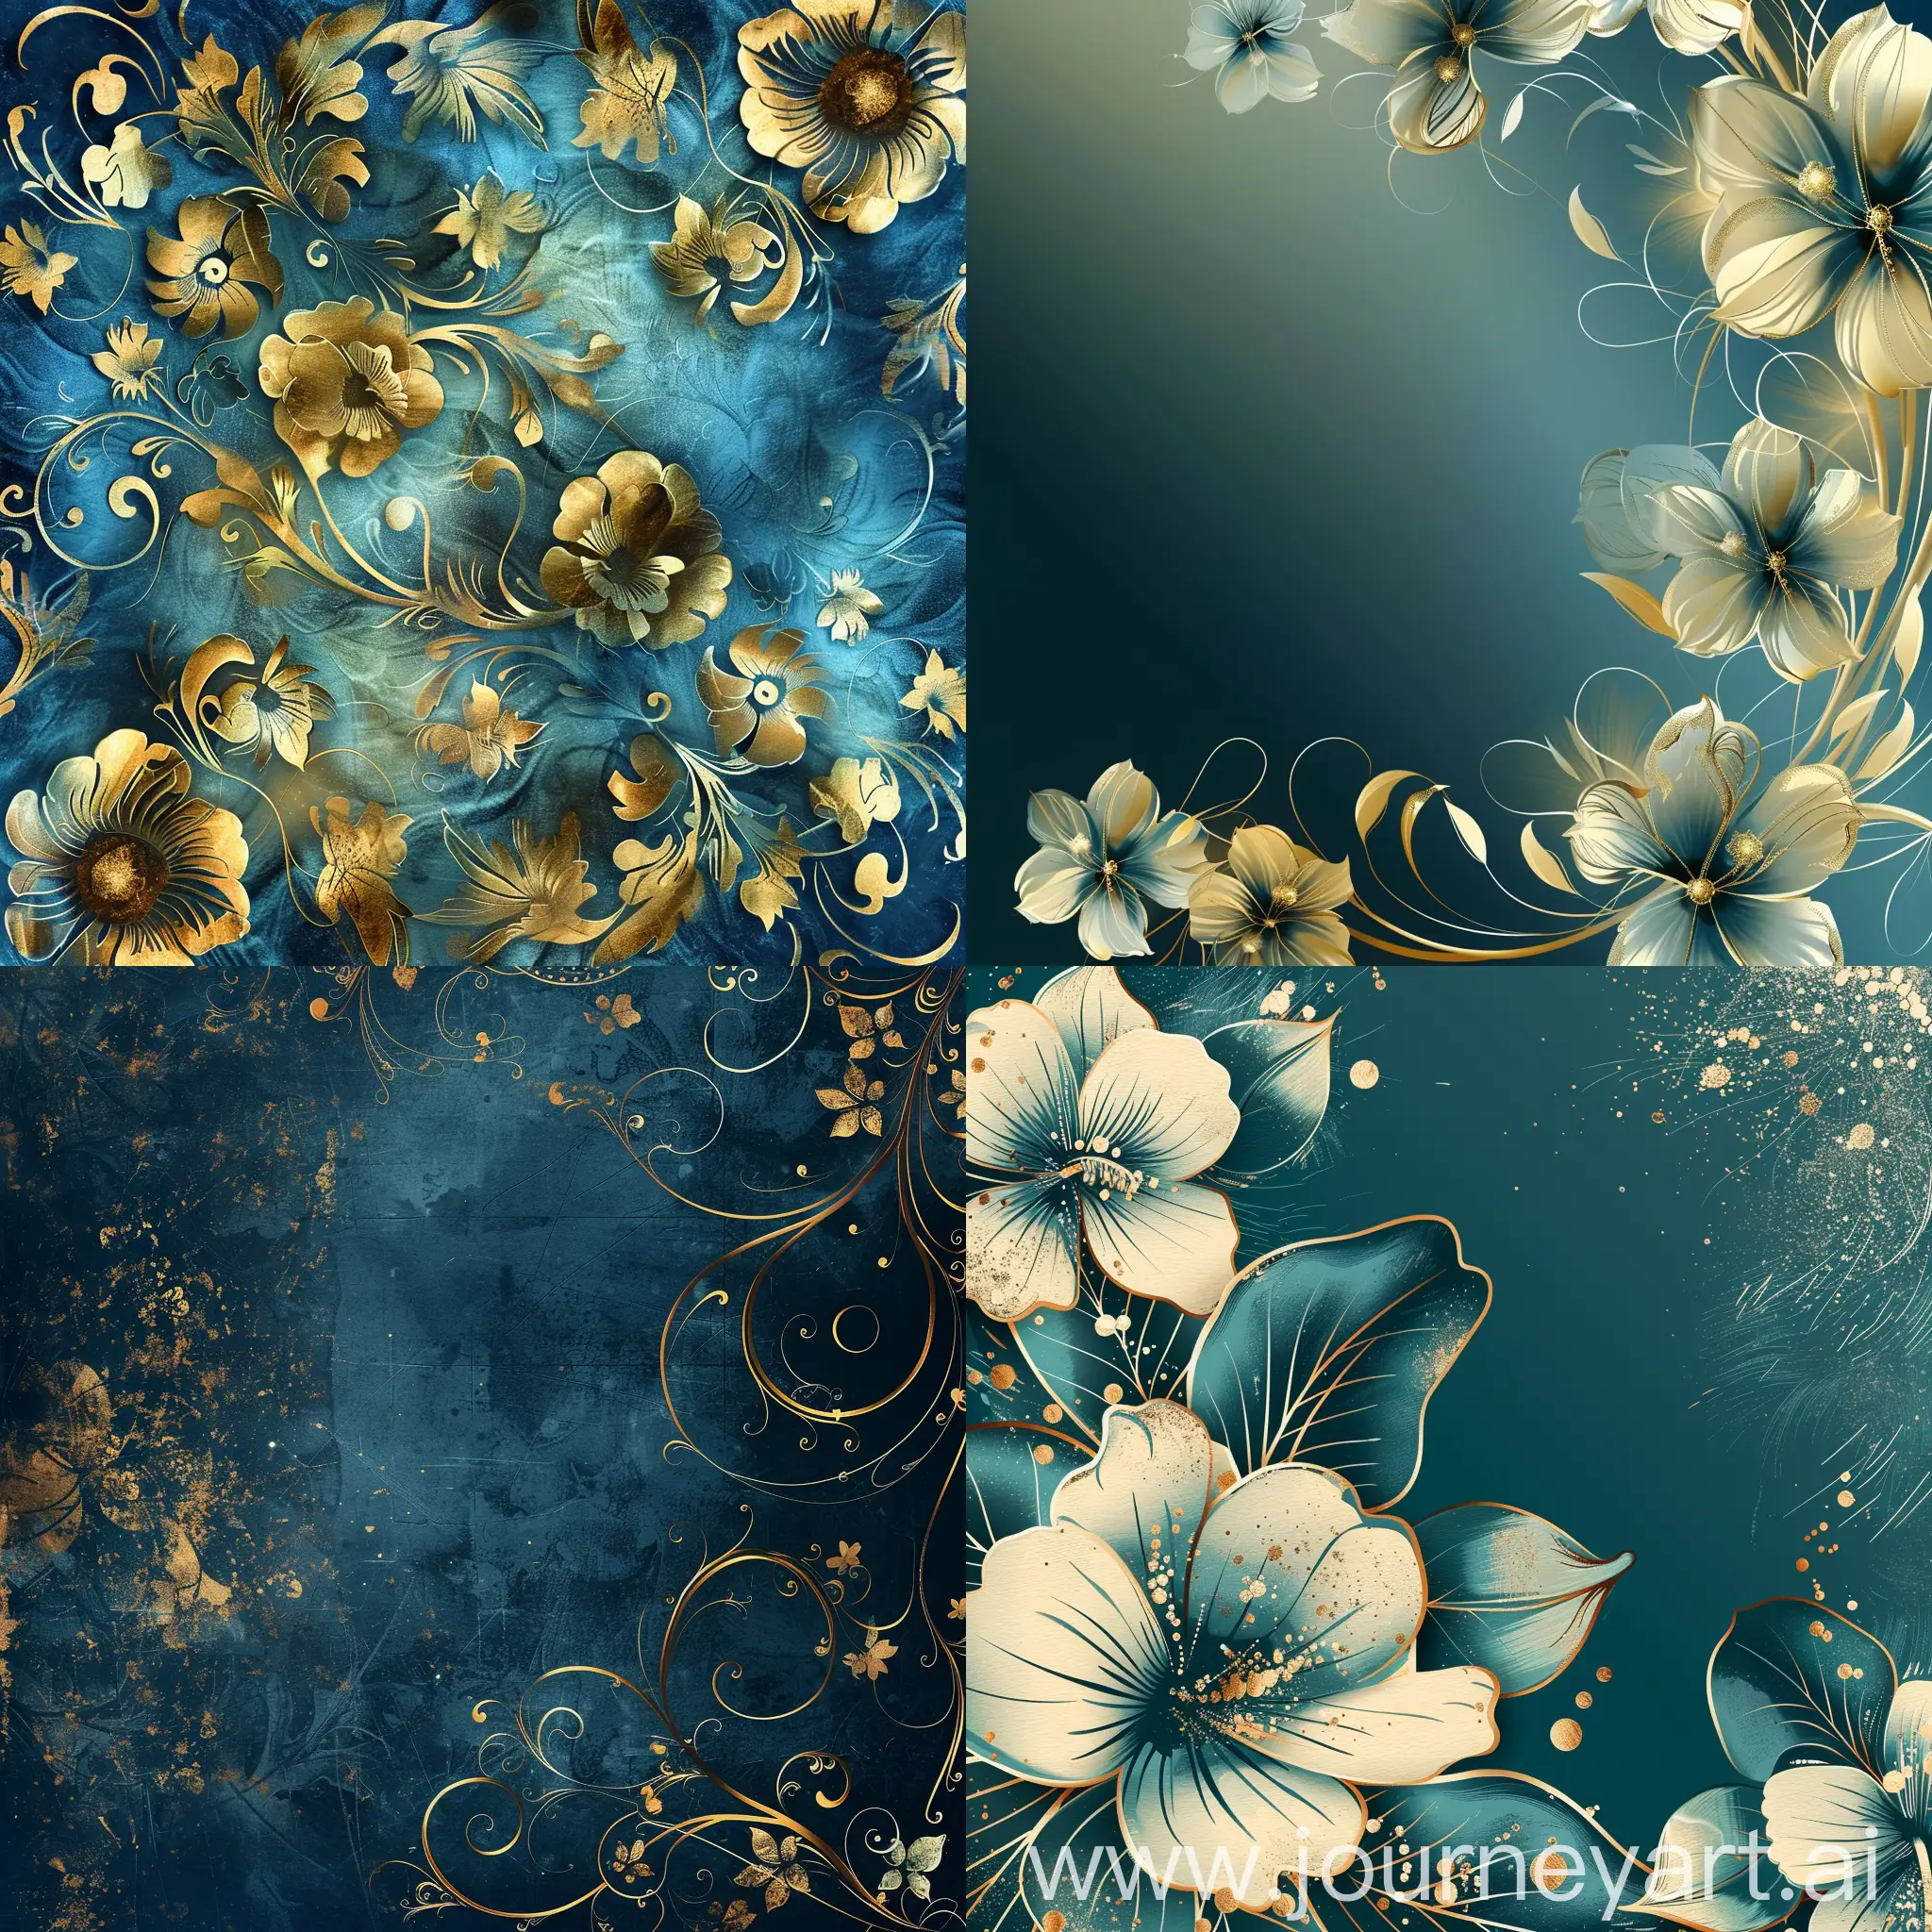 Beautiful-Fantasy-Floral-Background-in-Blue-and-Gold-Printable-Art